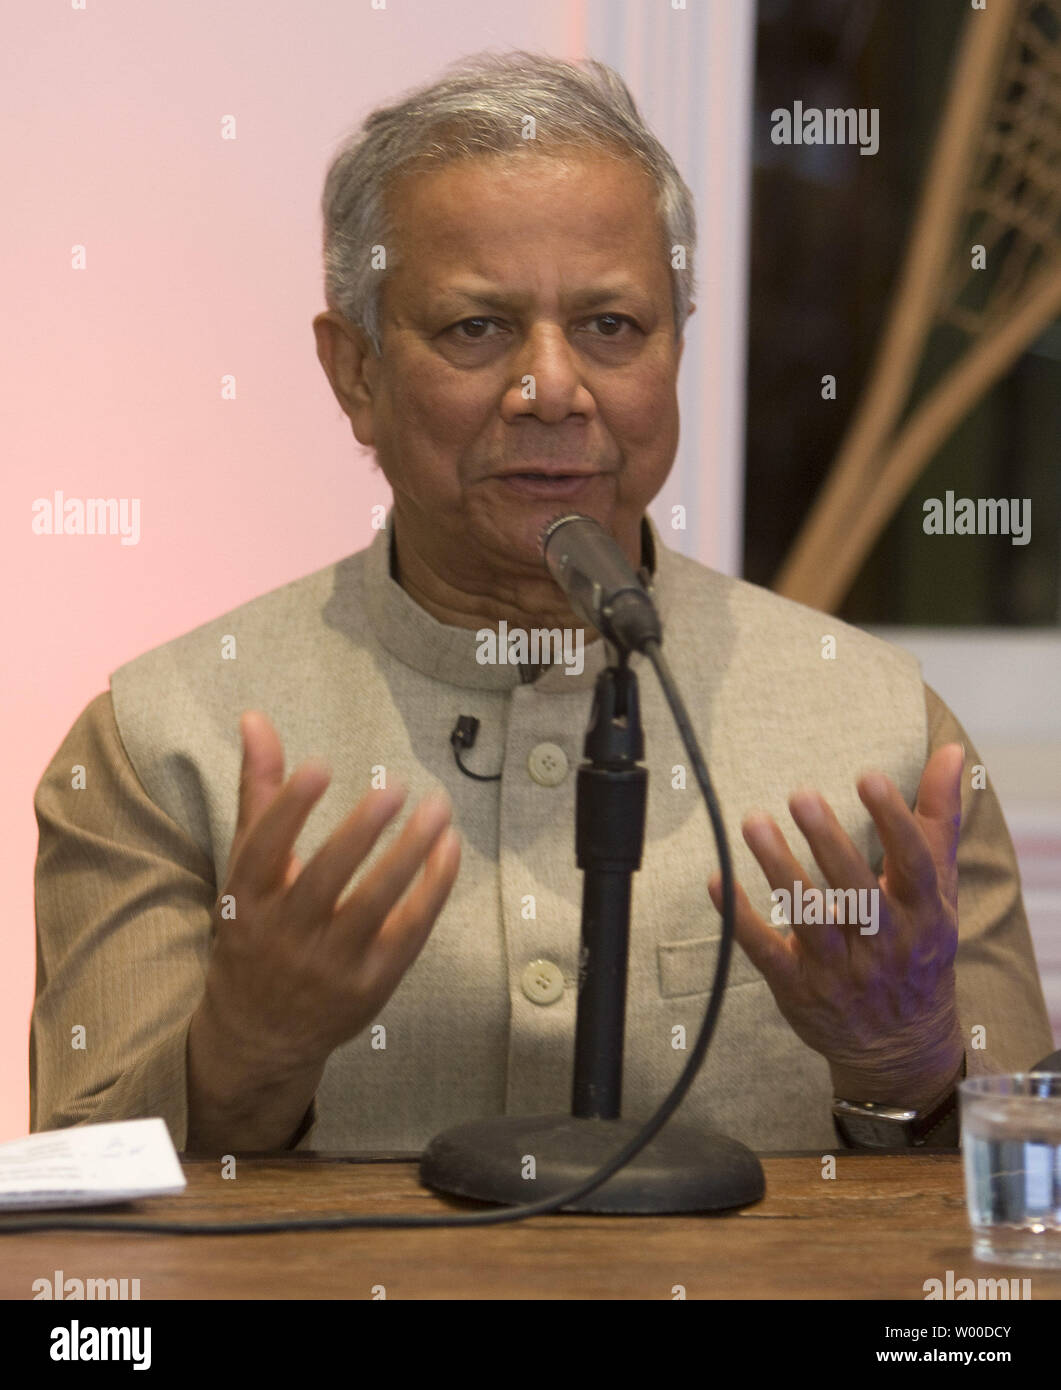 Nobel Peace Prize winner Professor Muhammad Yunus speaks at a press conference for his documentary 'To Catch A Dollar' at the 2010 Sundance Film Festival on January 24, 2010 in Park City, Utah.         UPI/Gary C. Caskey.. Stock Photo